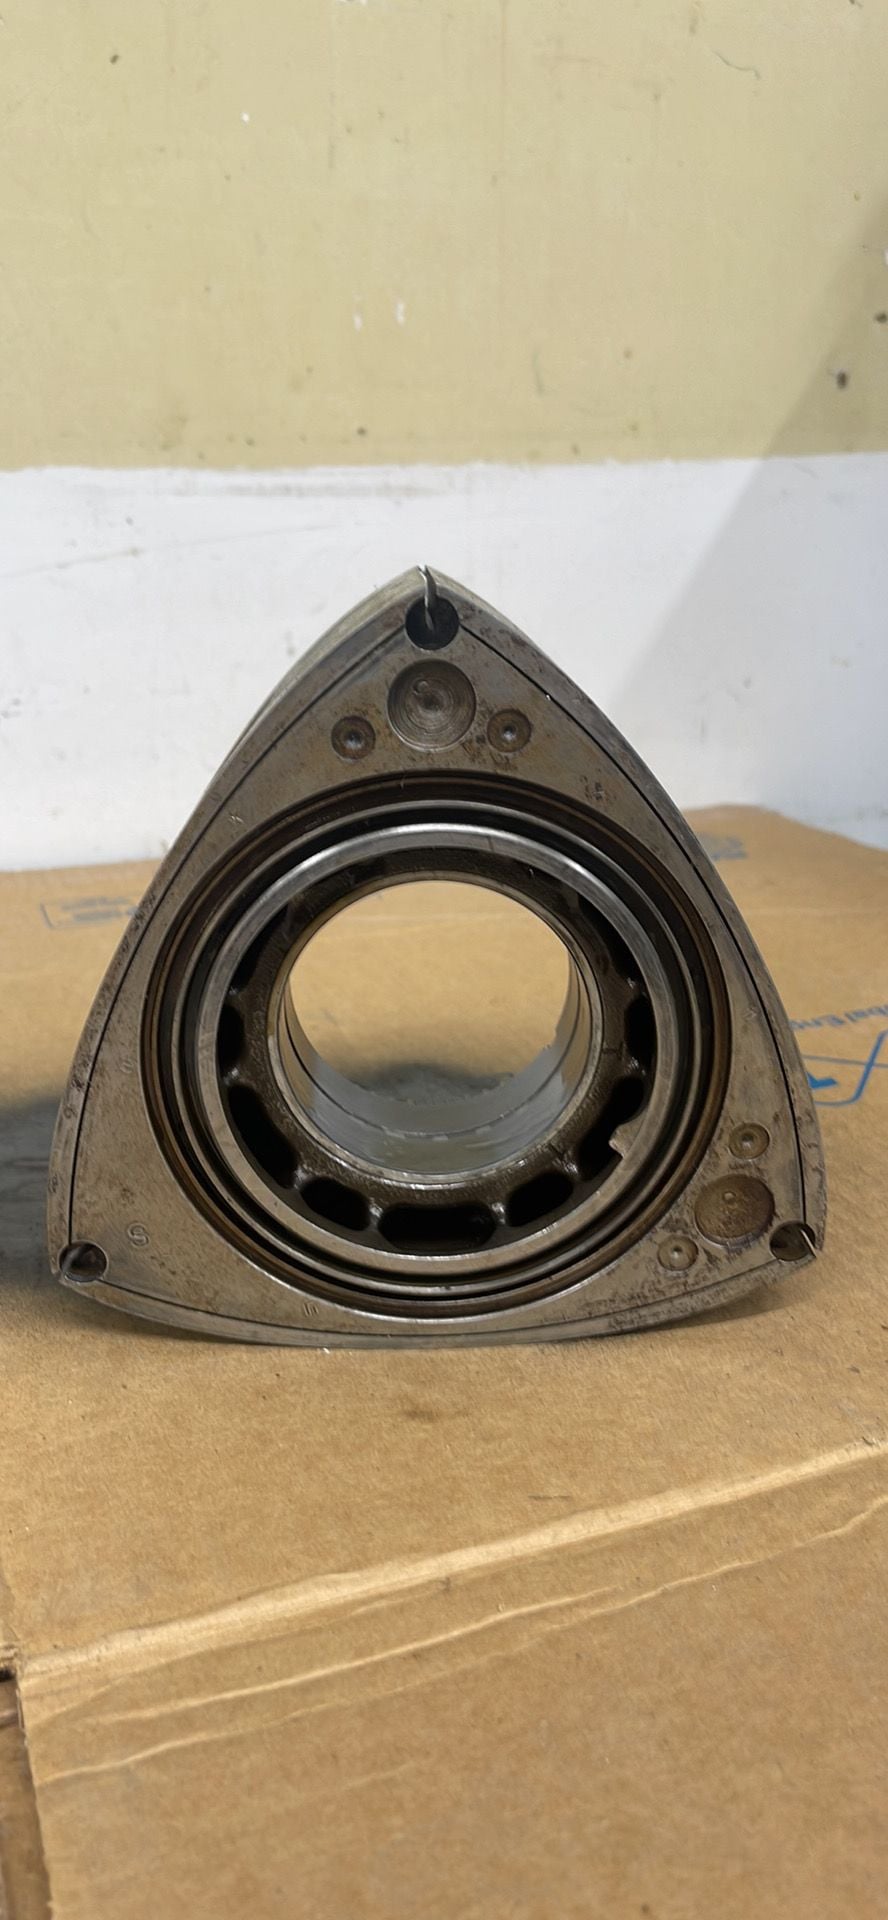 Engine - Internals - 13b Rew rotor housings and One rotor PARTING - Used - 1993 to 1995 Mazda RX-7 - Saint Anne, IL 60964, United States